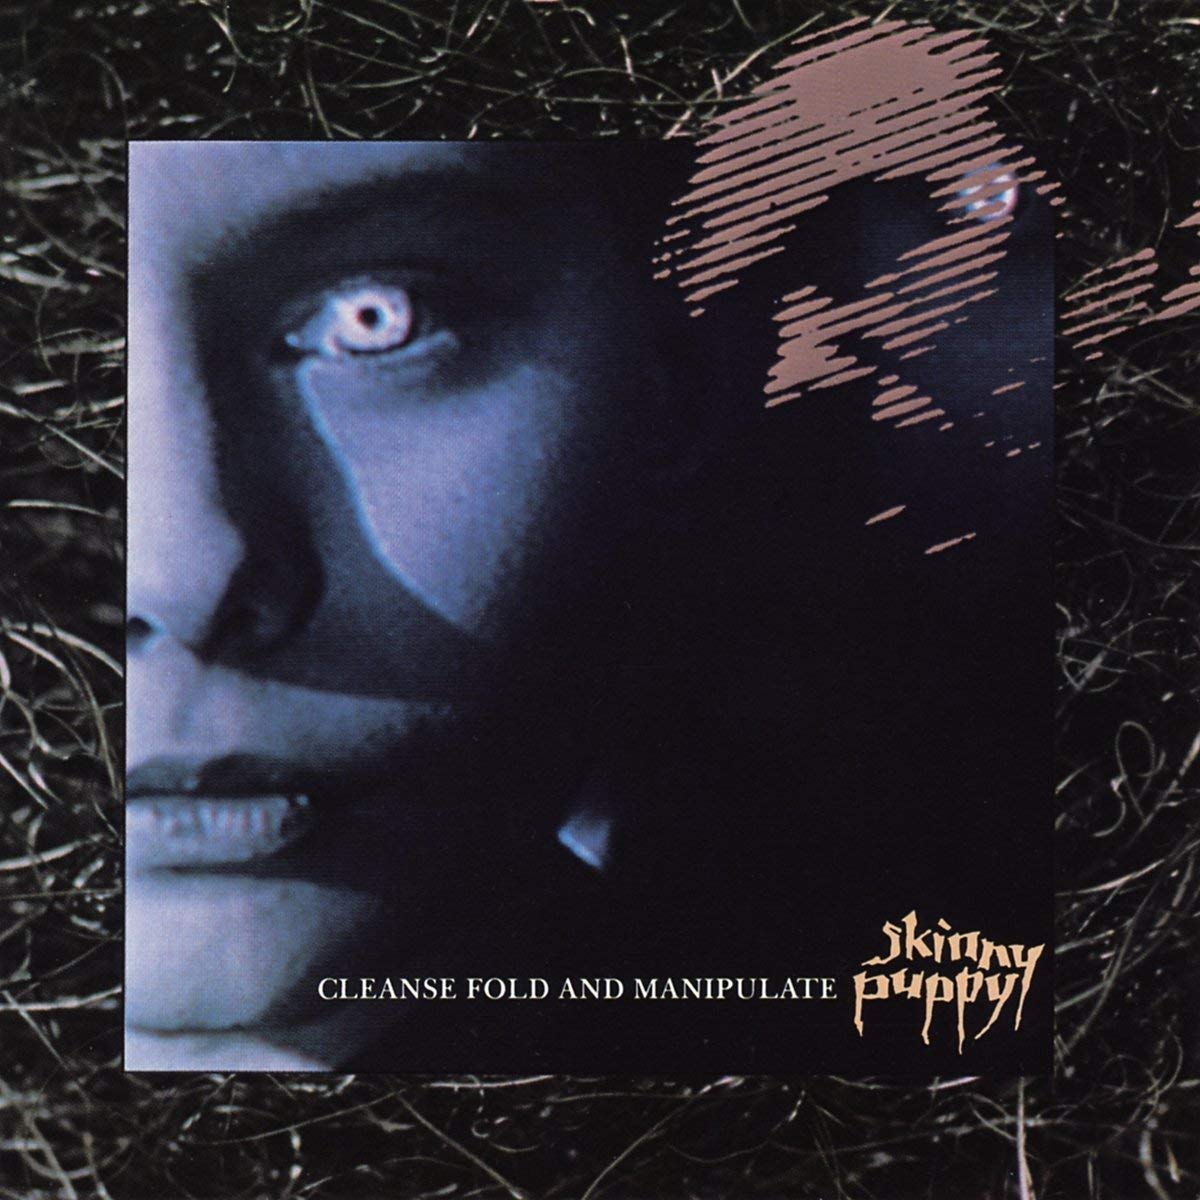 Skinny Puppy - Cleanse Fold and Manipulate - LP